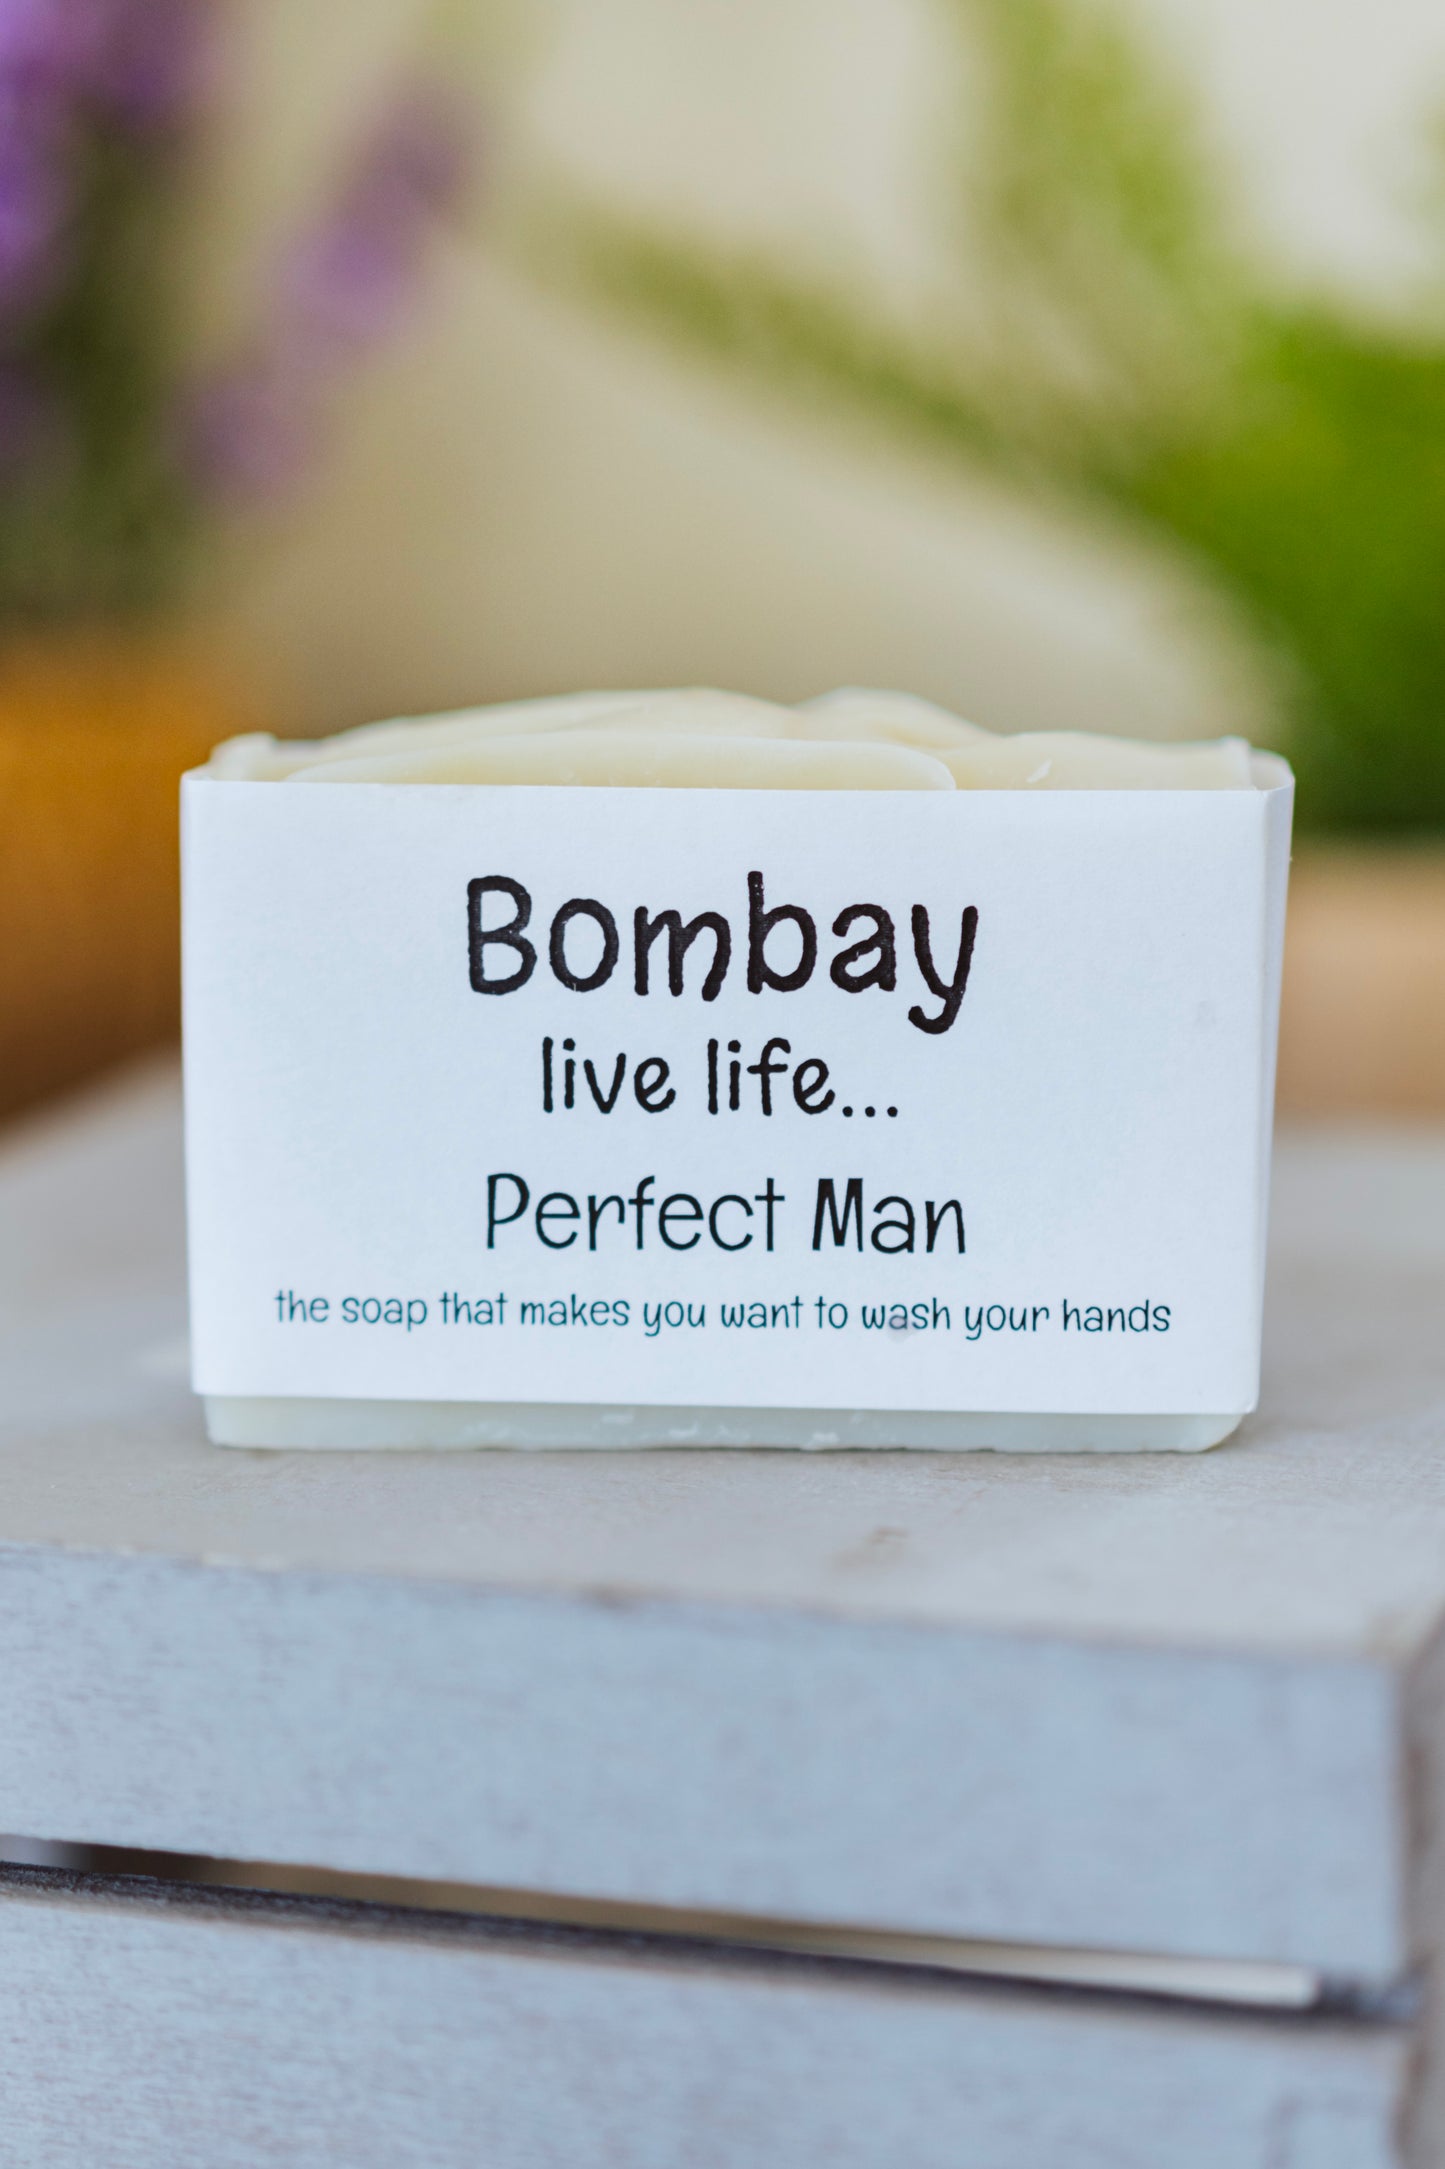 Bombay Specialty Soap: The Perfect Man